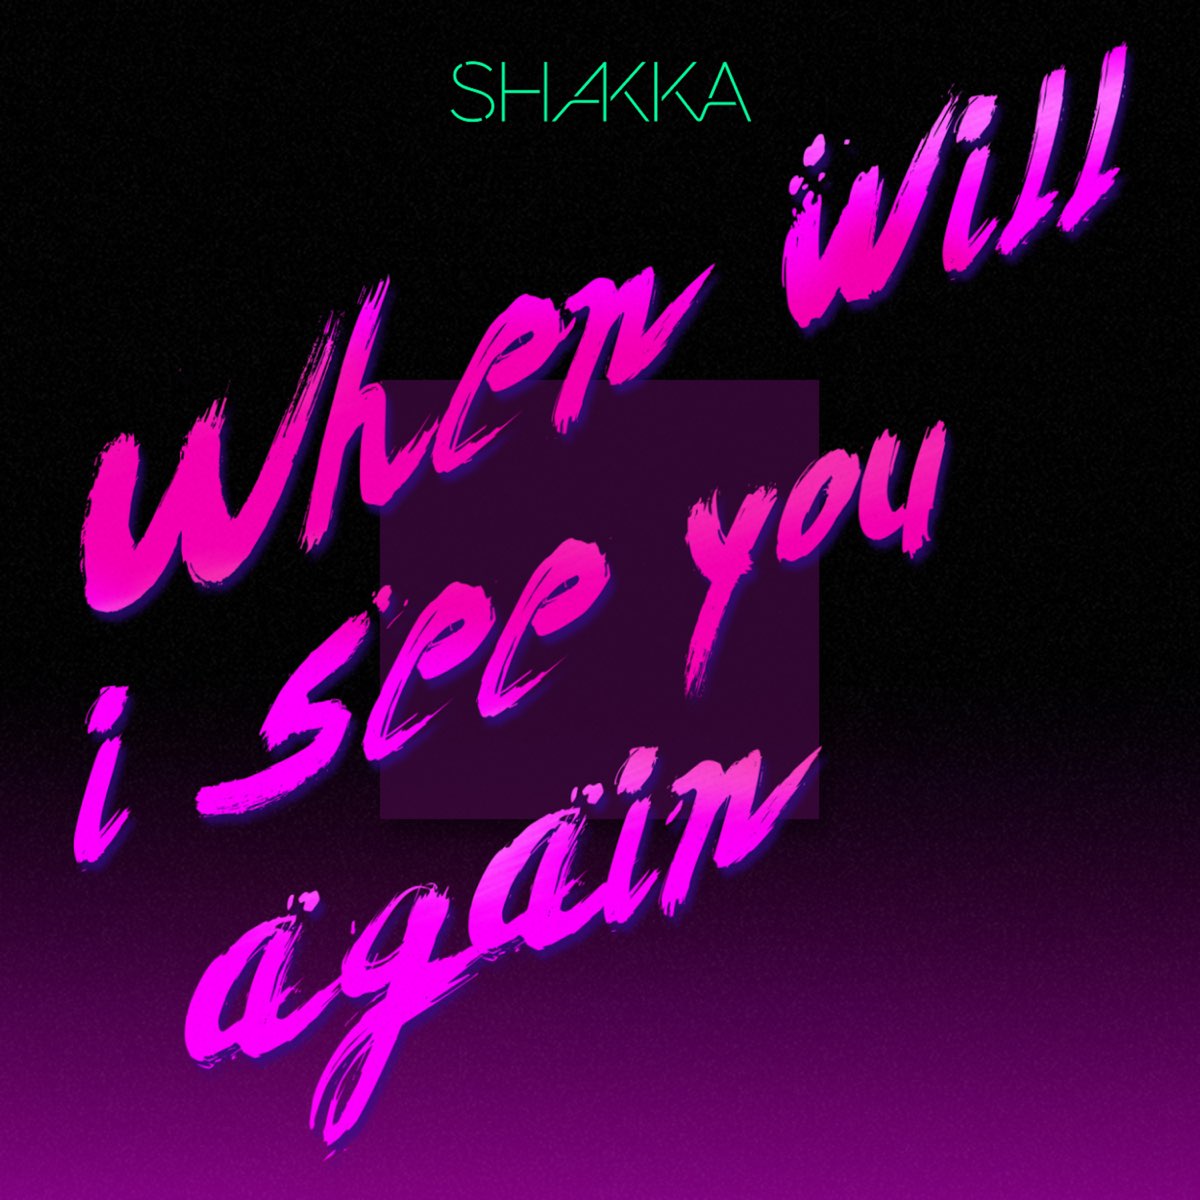 See you seem. When will i see you again. When will i see you again Shakka. When will i see you again by Shakka (Sped up). See you when i see you.